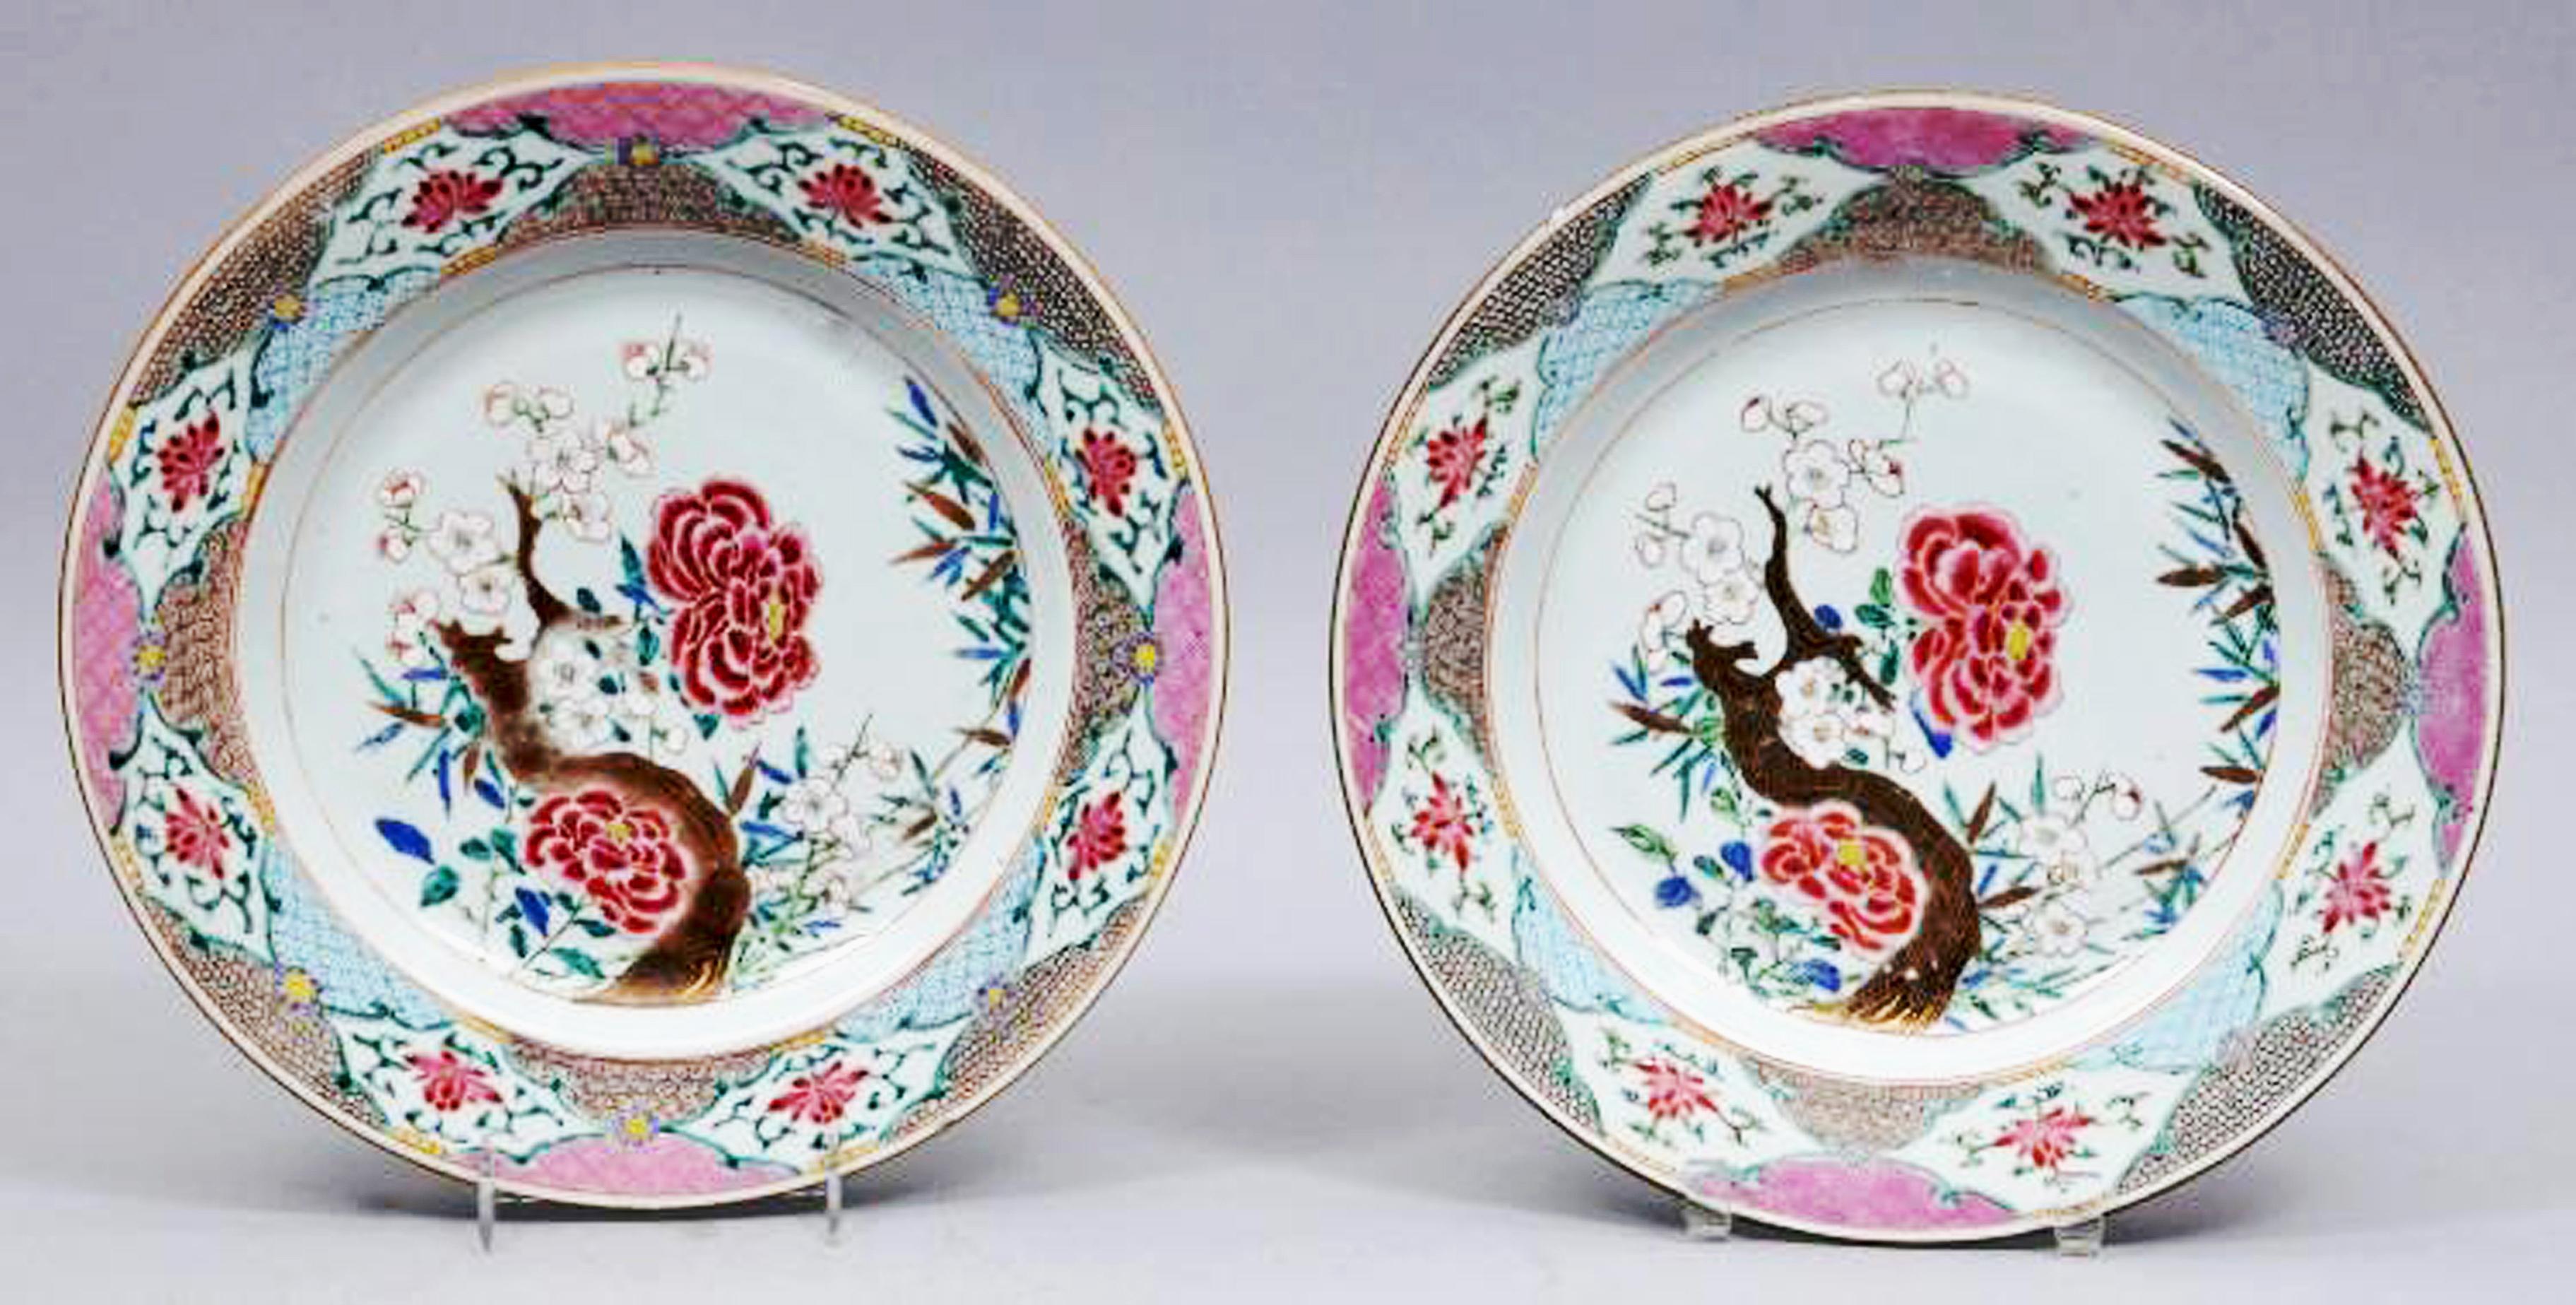 Chinese Export Famille Rose Porcelain Large Dishes, circa 1765-1775 In Good Condition For Sale In Downingtown, PA